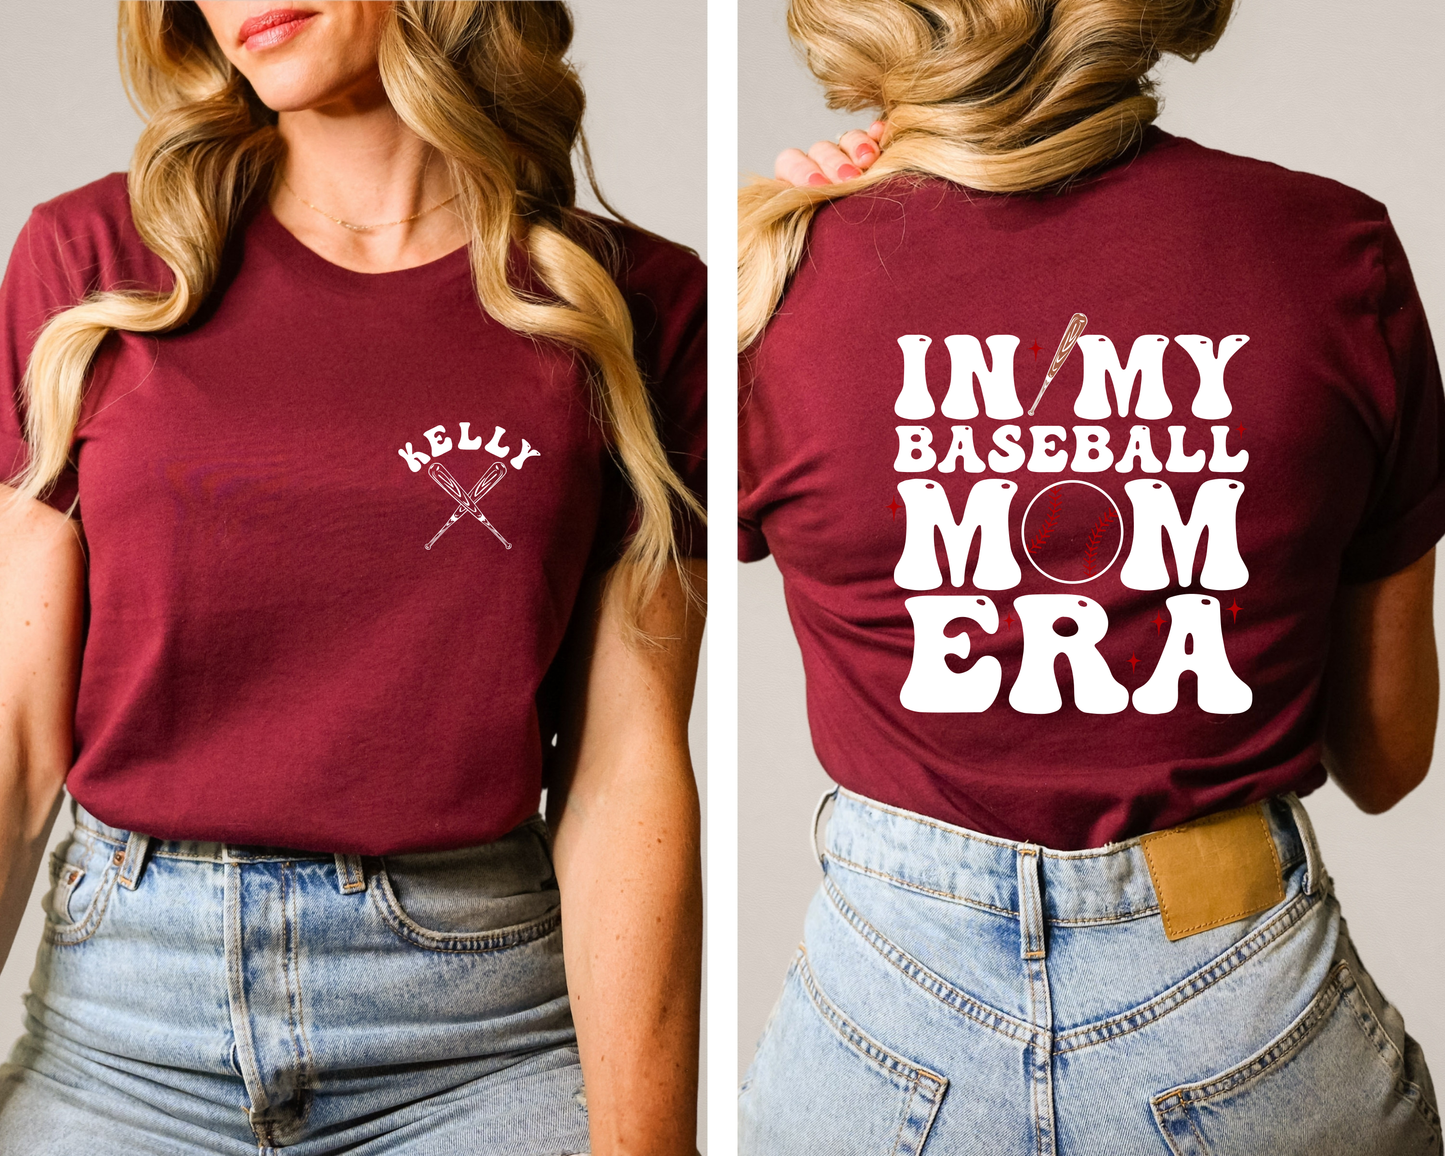 "Basketball Mom Shirt: Show your love for the sport and your child with this stylish tee."